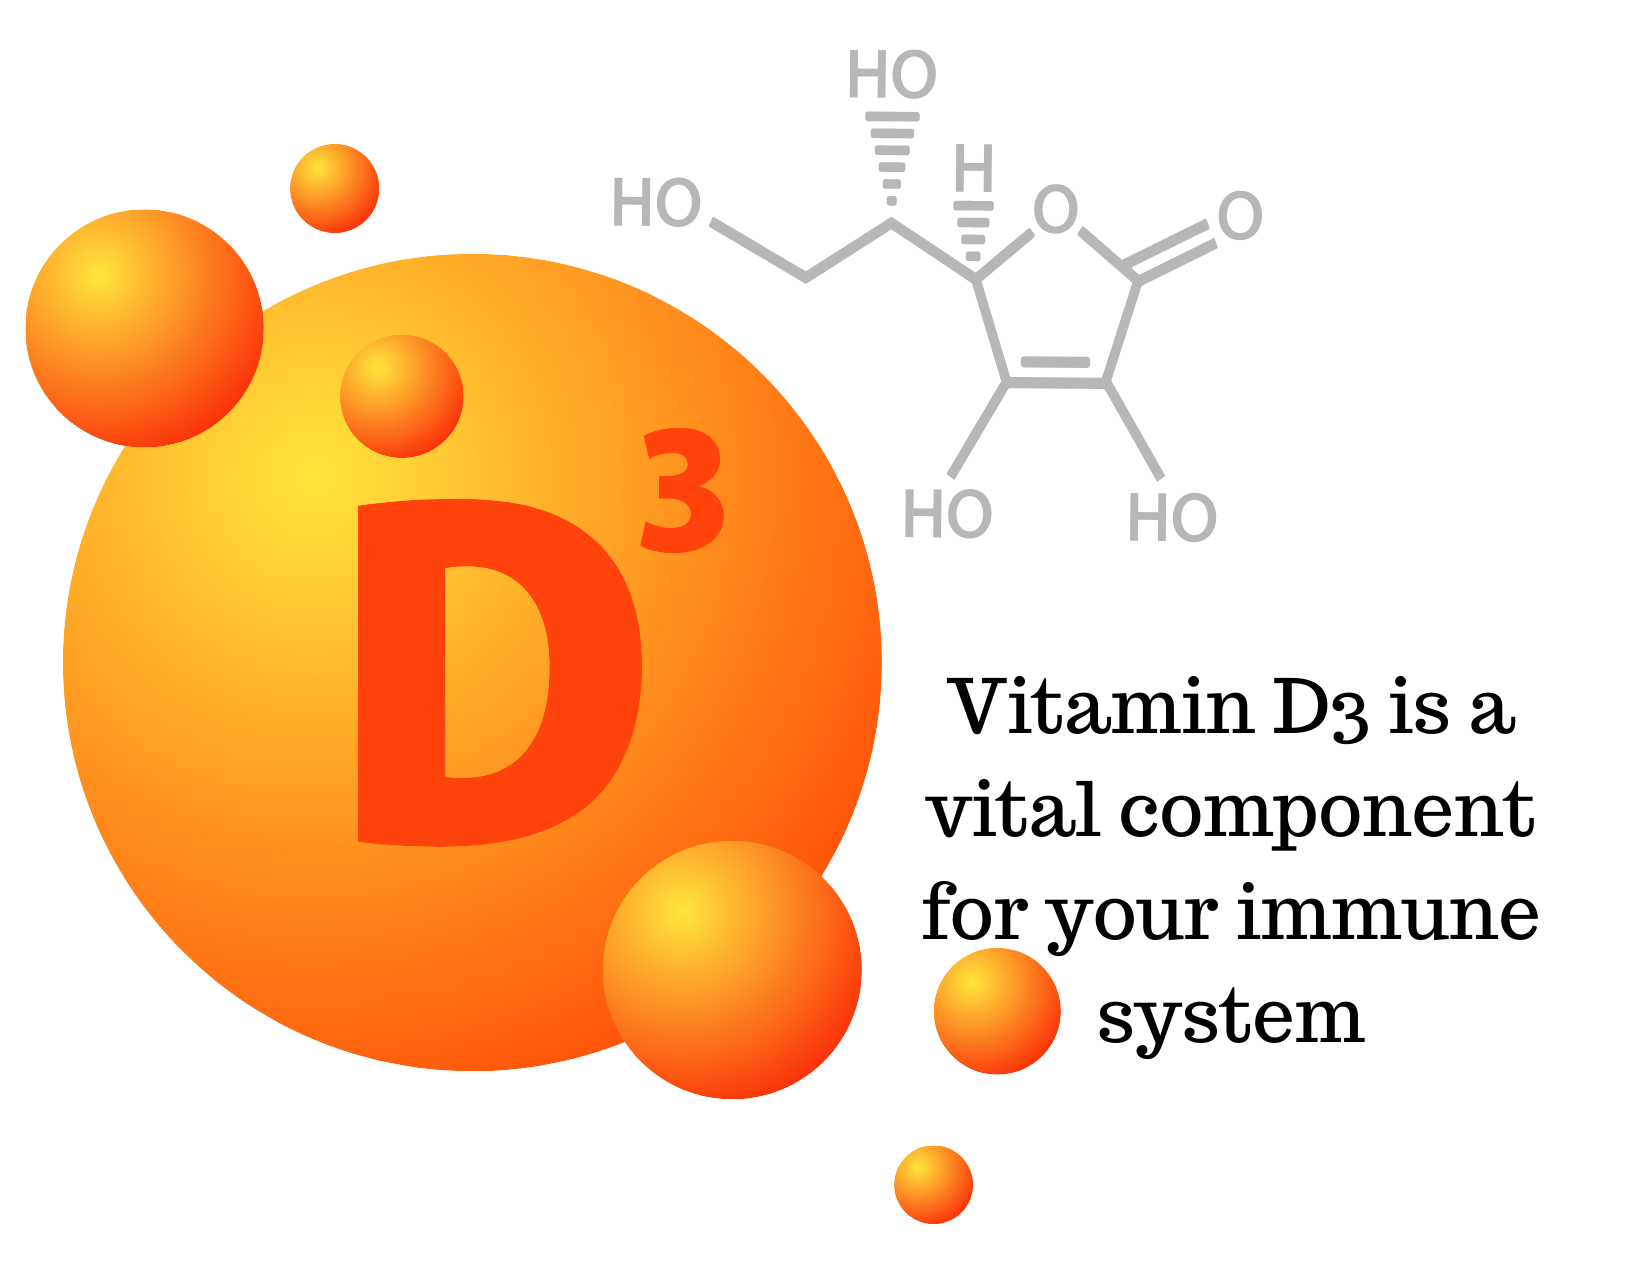 Vitamin D3 is a vital component for your immune system. Are you getting enough Vitamin D everyday??